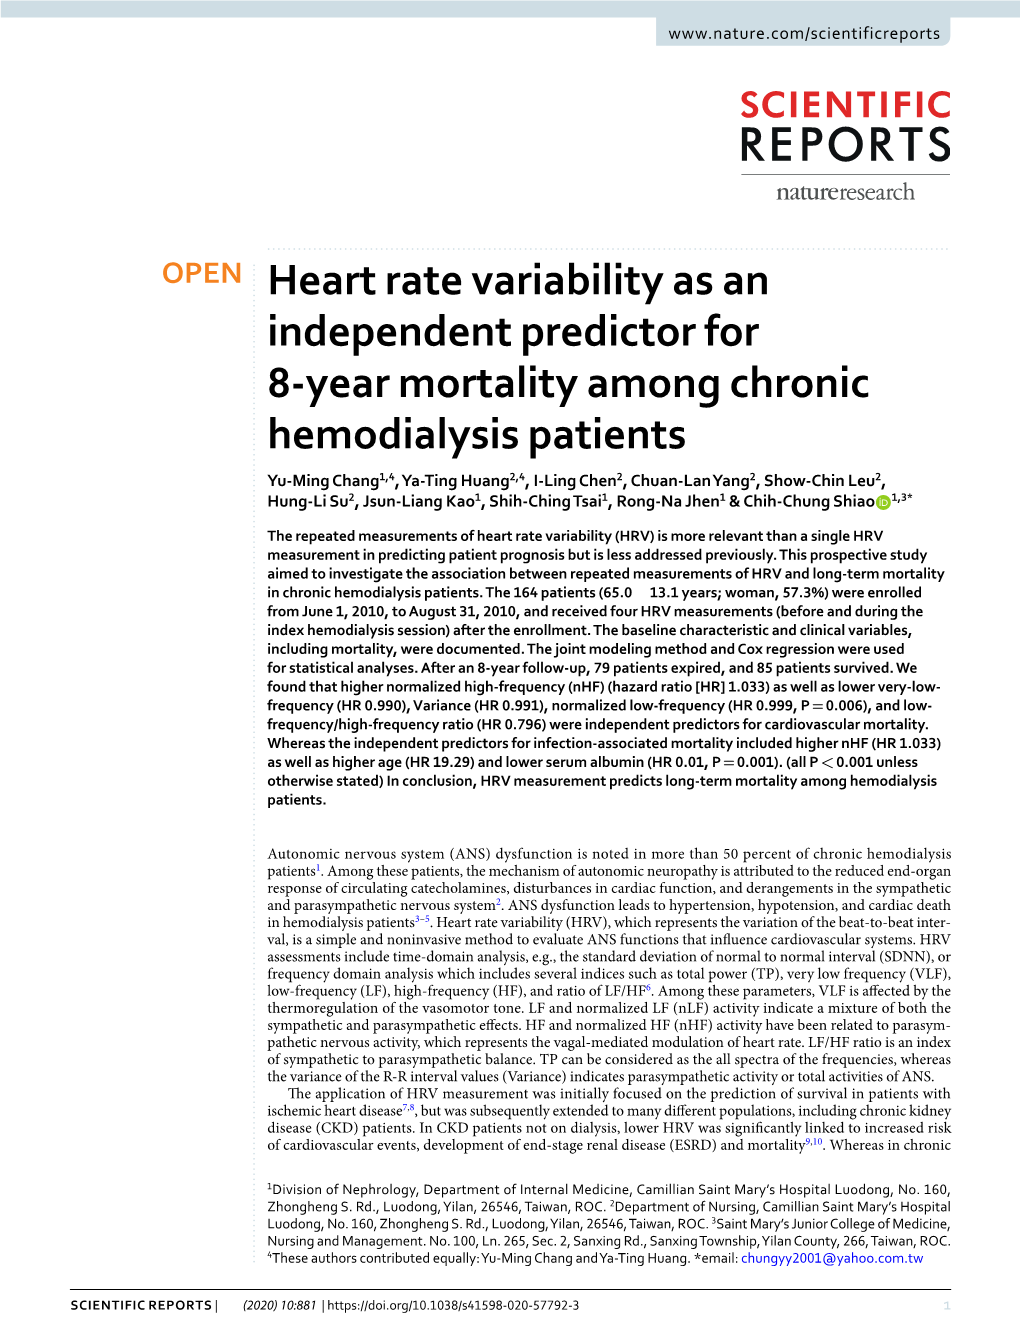 Heart Rate Variability As an Independent Predictor for 8-Year